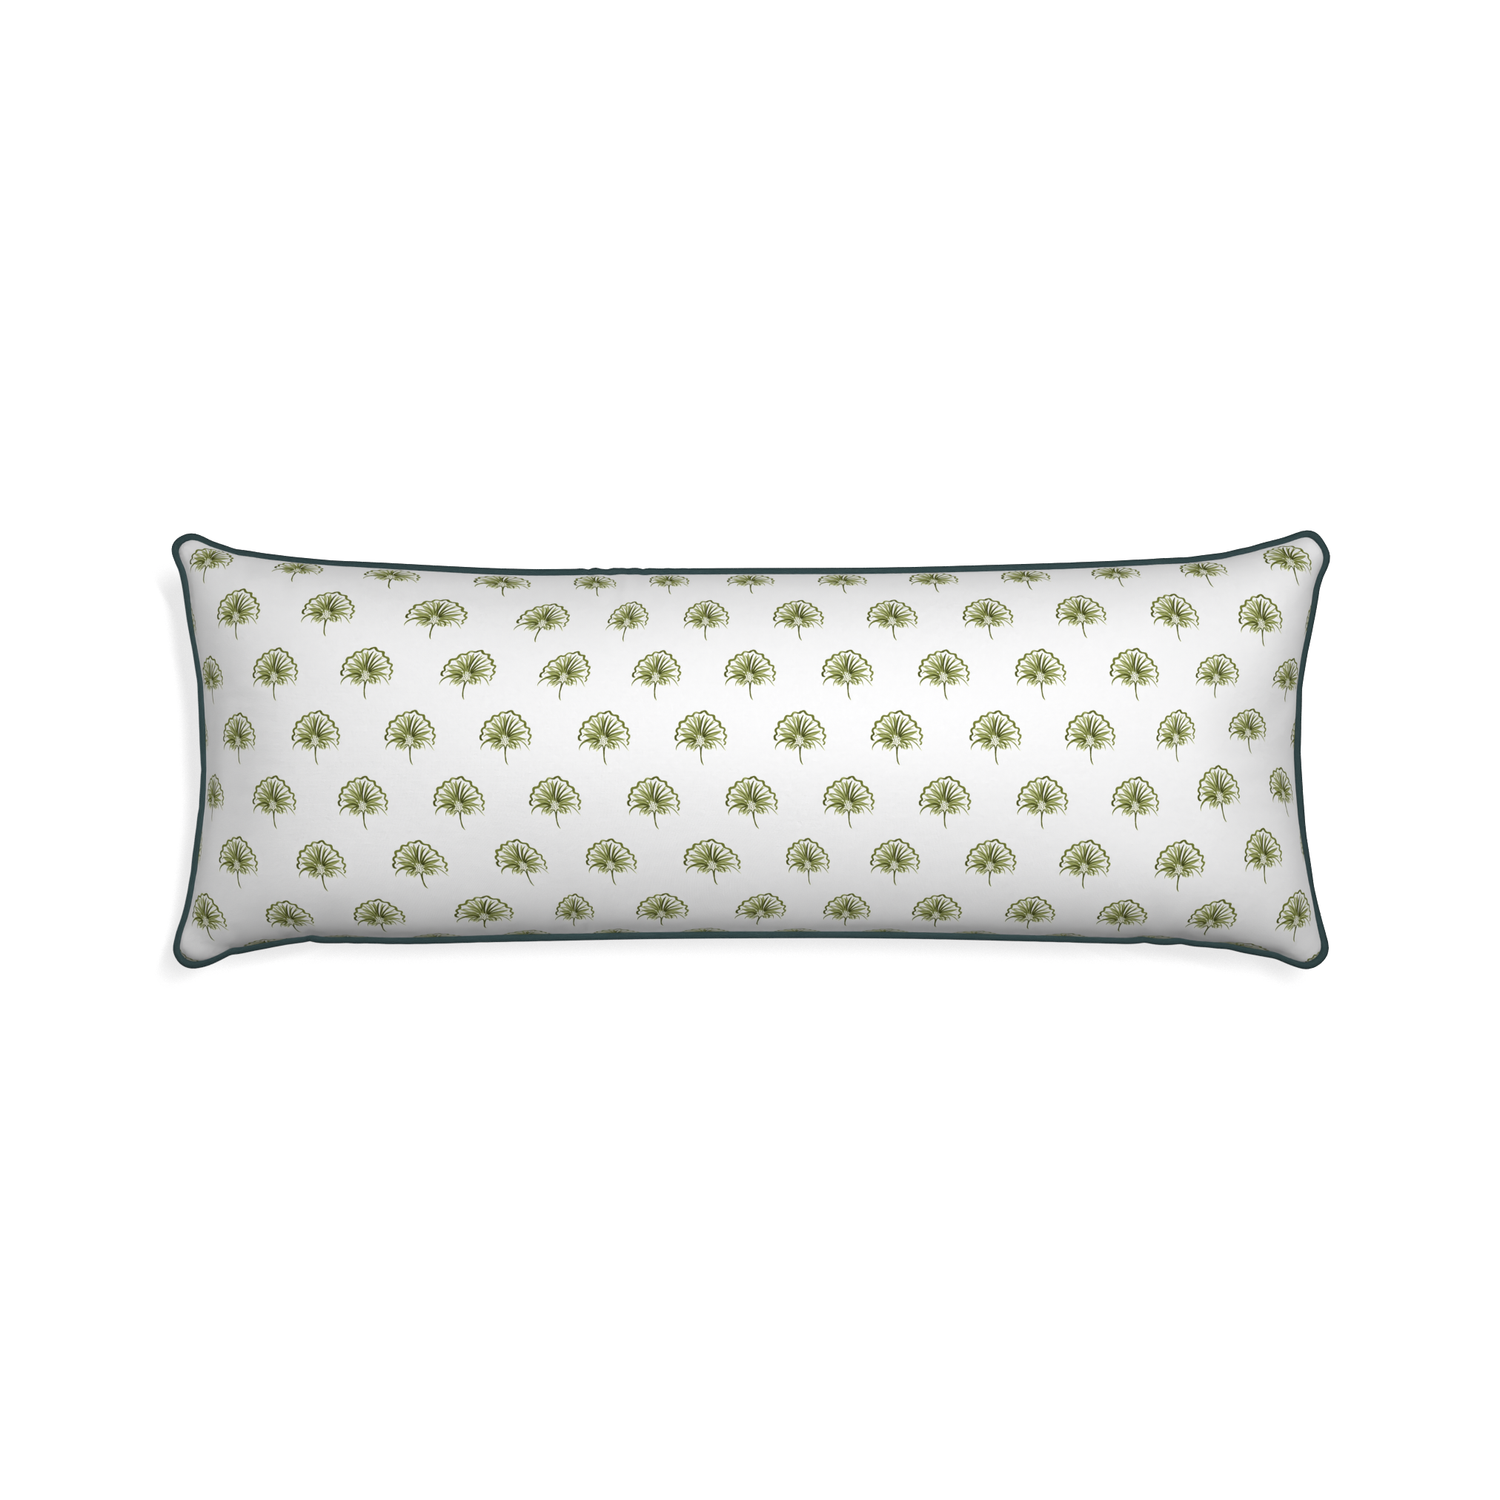 Xl-lumbar penelope moss custom green floralpillow with p piping on white background